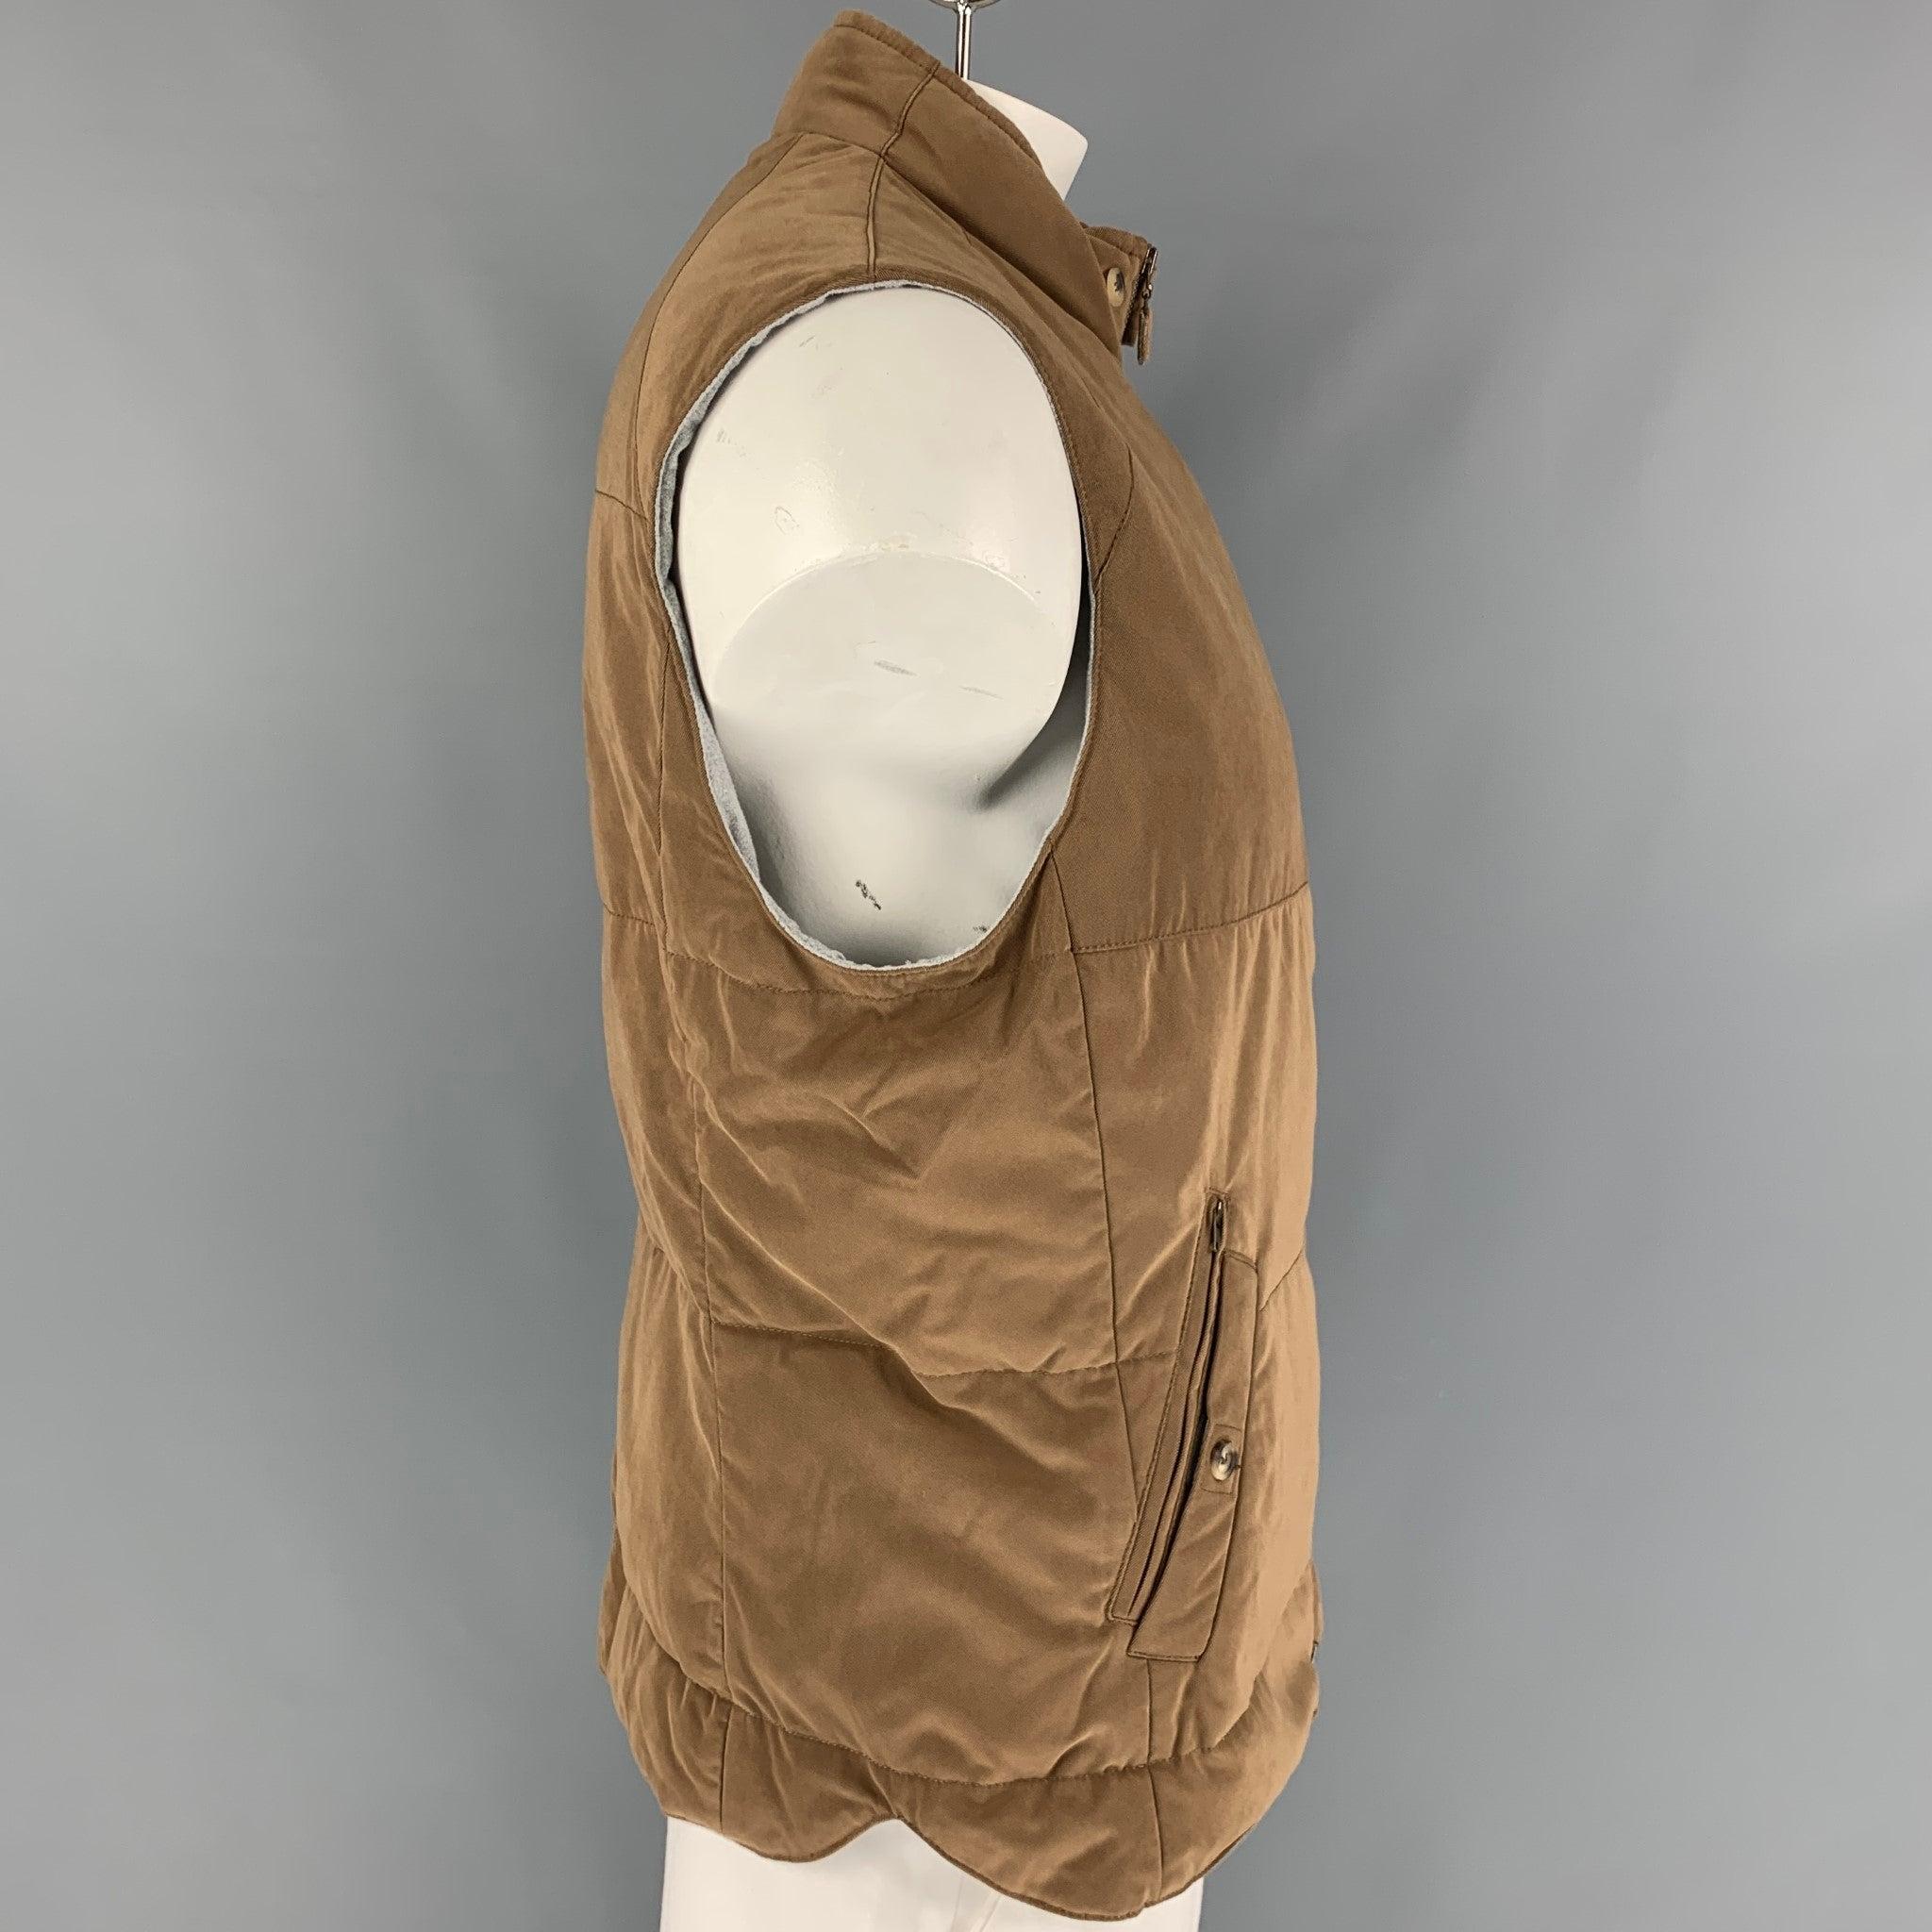 BRUNELLO CUCINELLI vest comes in a brown quilted wool / cashmere featuring a buttoned collar, front pockets, and a zip up closure. Made in Italy. Excellent Pre-Owned Condition. 

Marked:   XL 

Measurements: 
 
Shoulder: 19 inches  Chest: 48 inches 